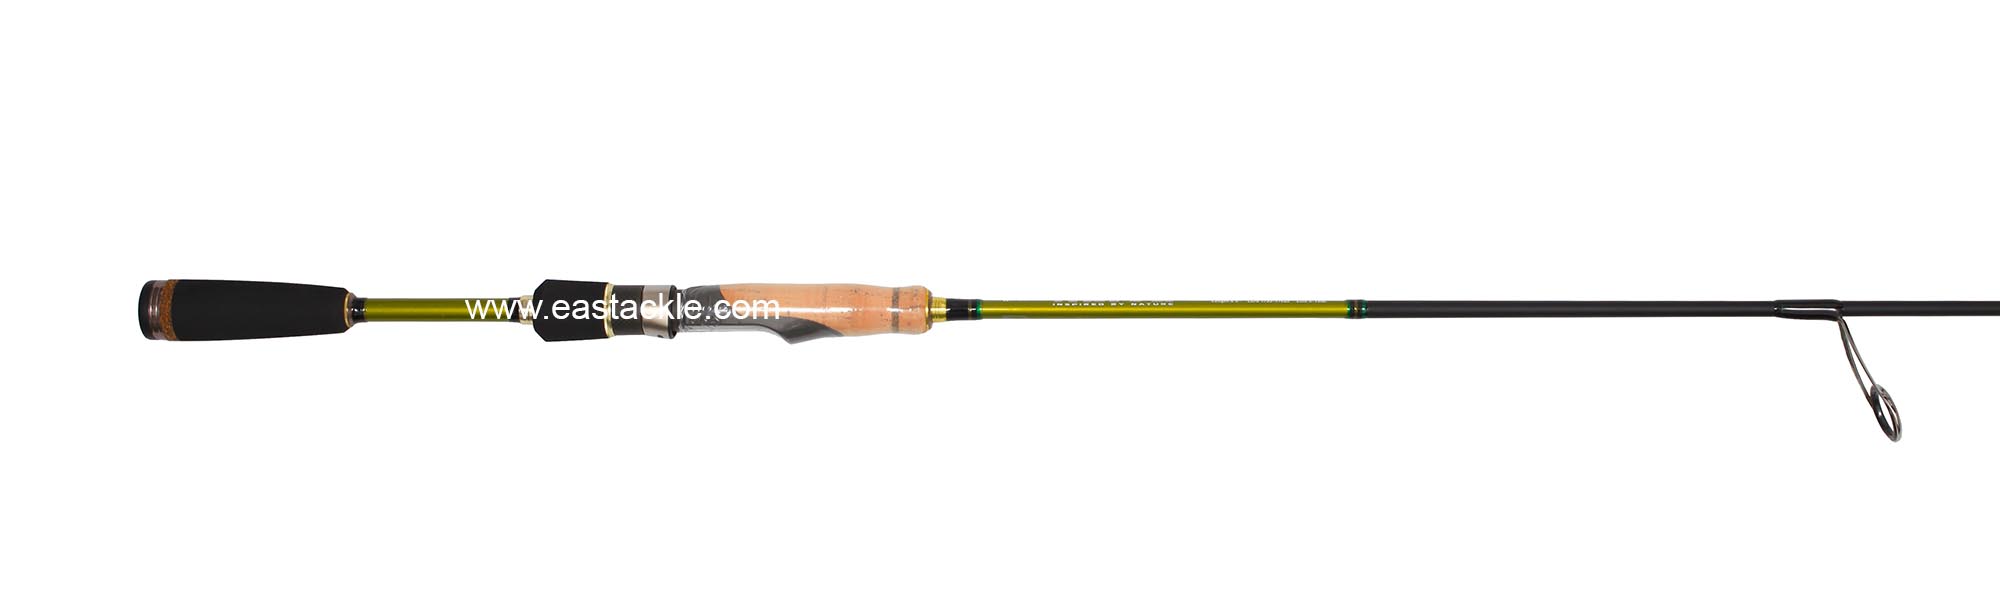 Rapala - Koivu - KVS651M - Spinning Rod - Butt to Stripper Guide (Side View) | Eastackle